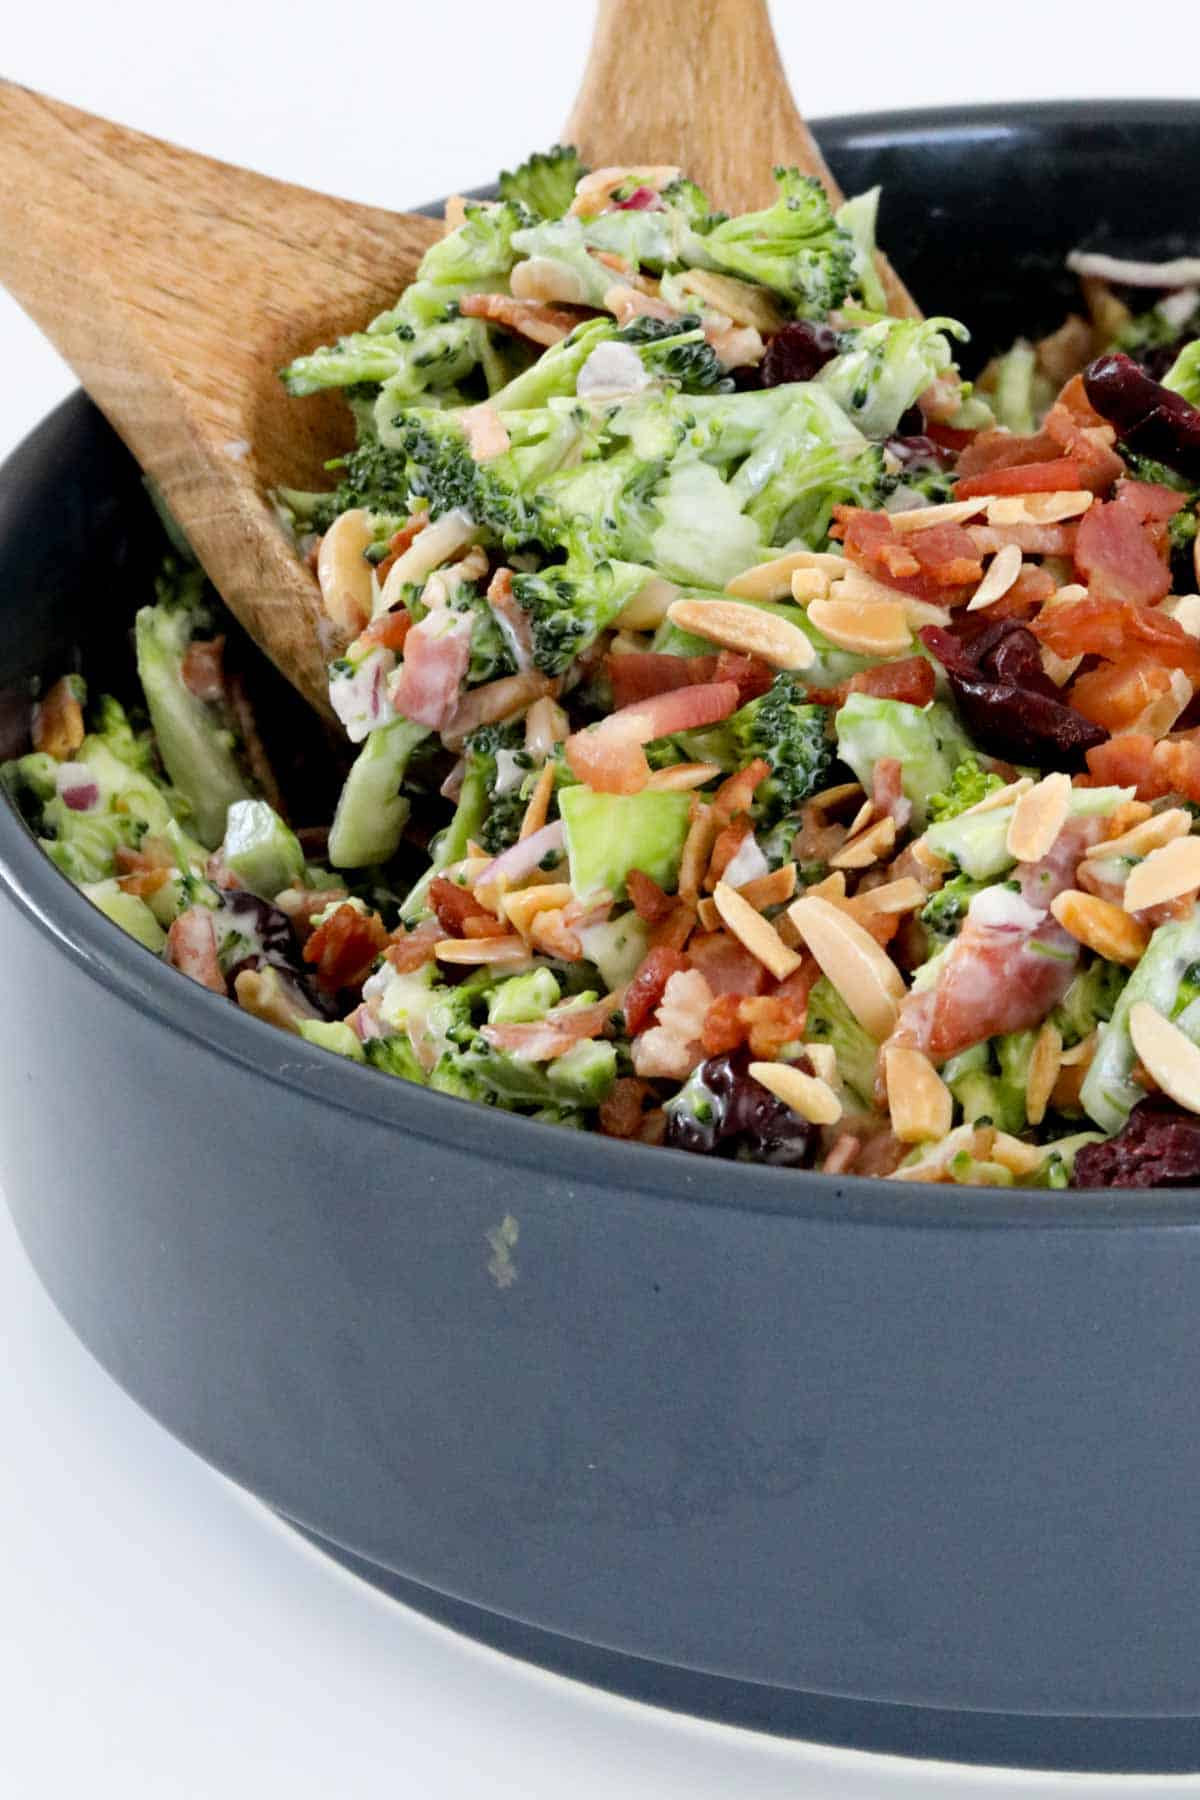 Two wooden salad servers in a bowl of crunchy broccoli salad with slivered almonds and cranberries.